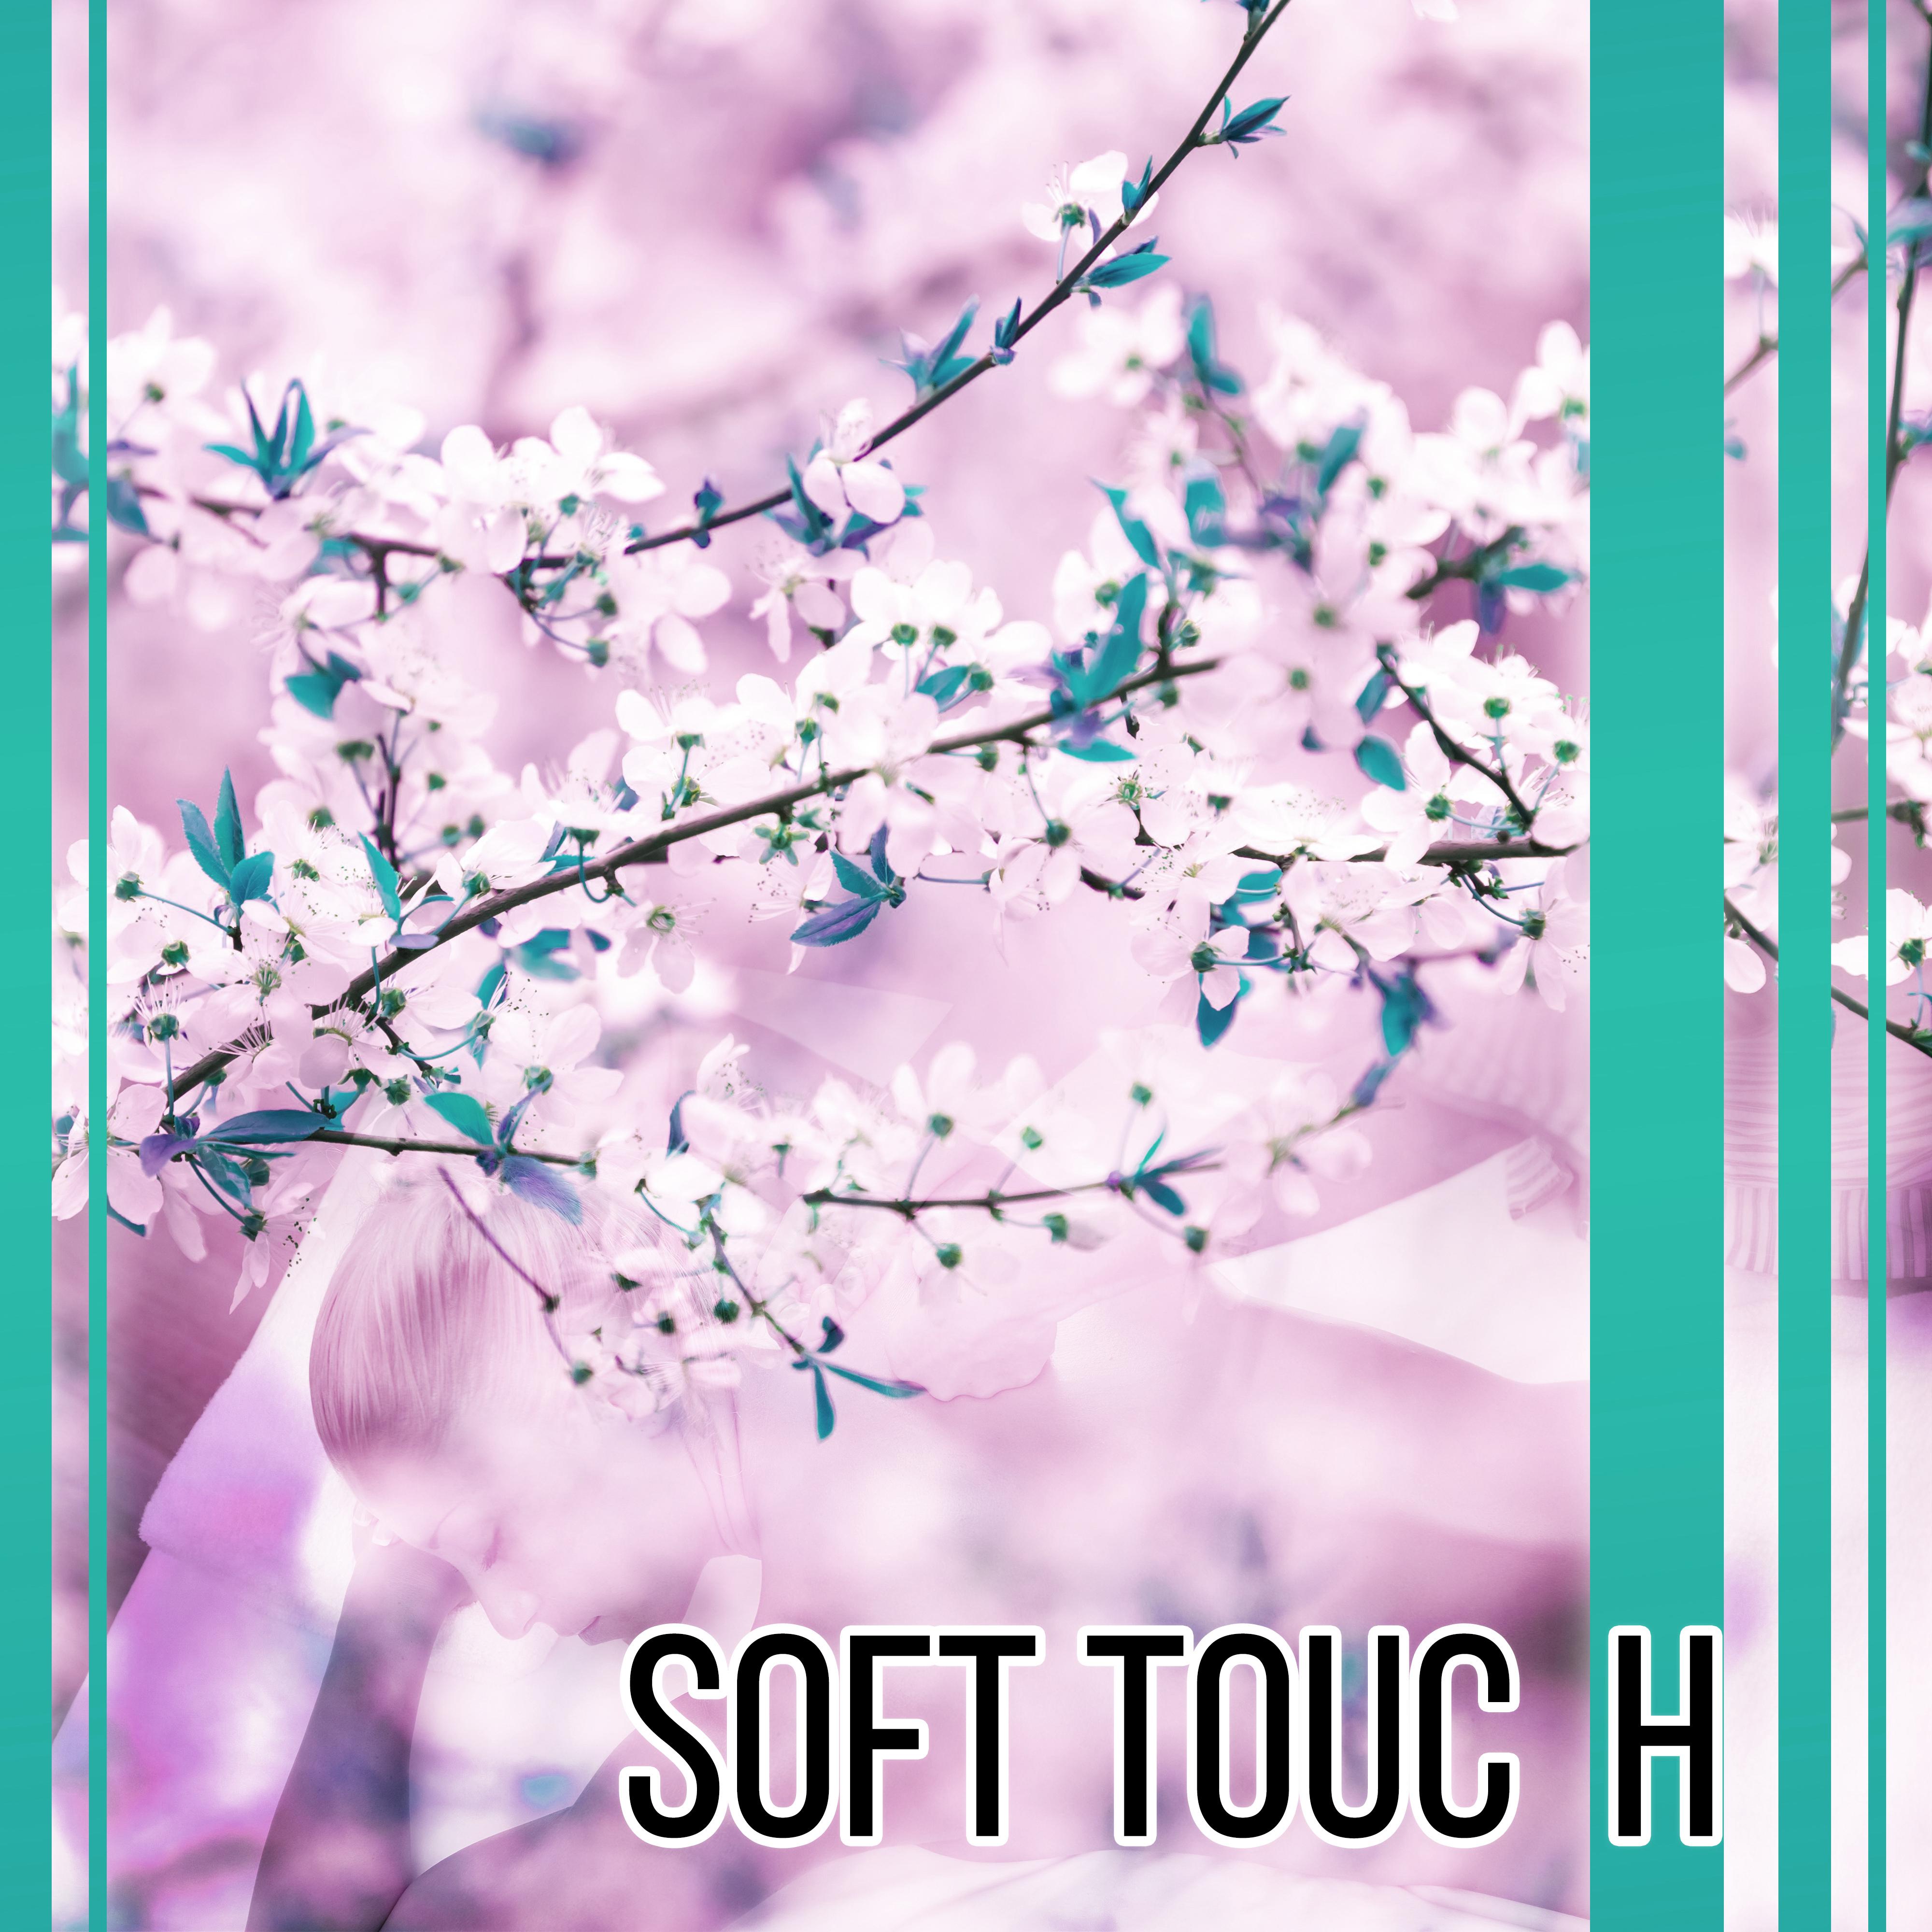 Soft Touch  - Music for Massage, Spa, Wellness, Beauty Parlour, Relaxing Music Full of Nature Sounds